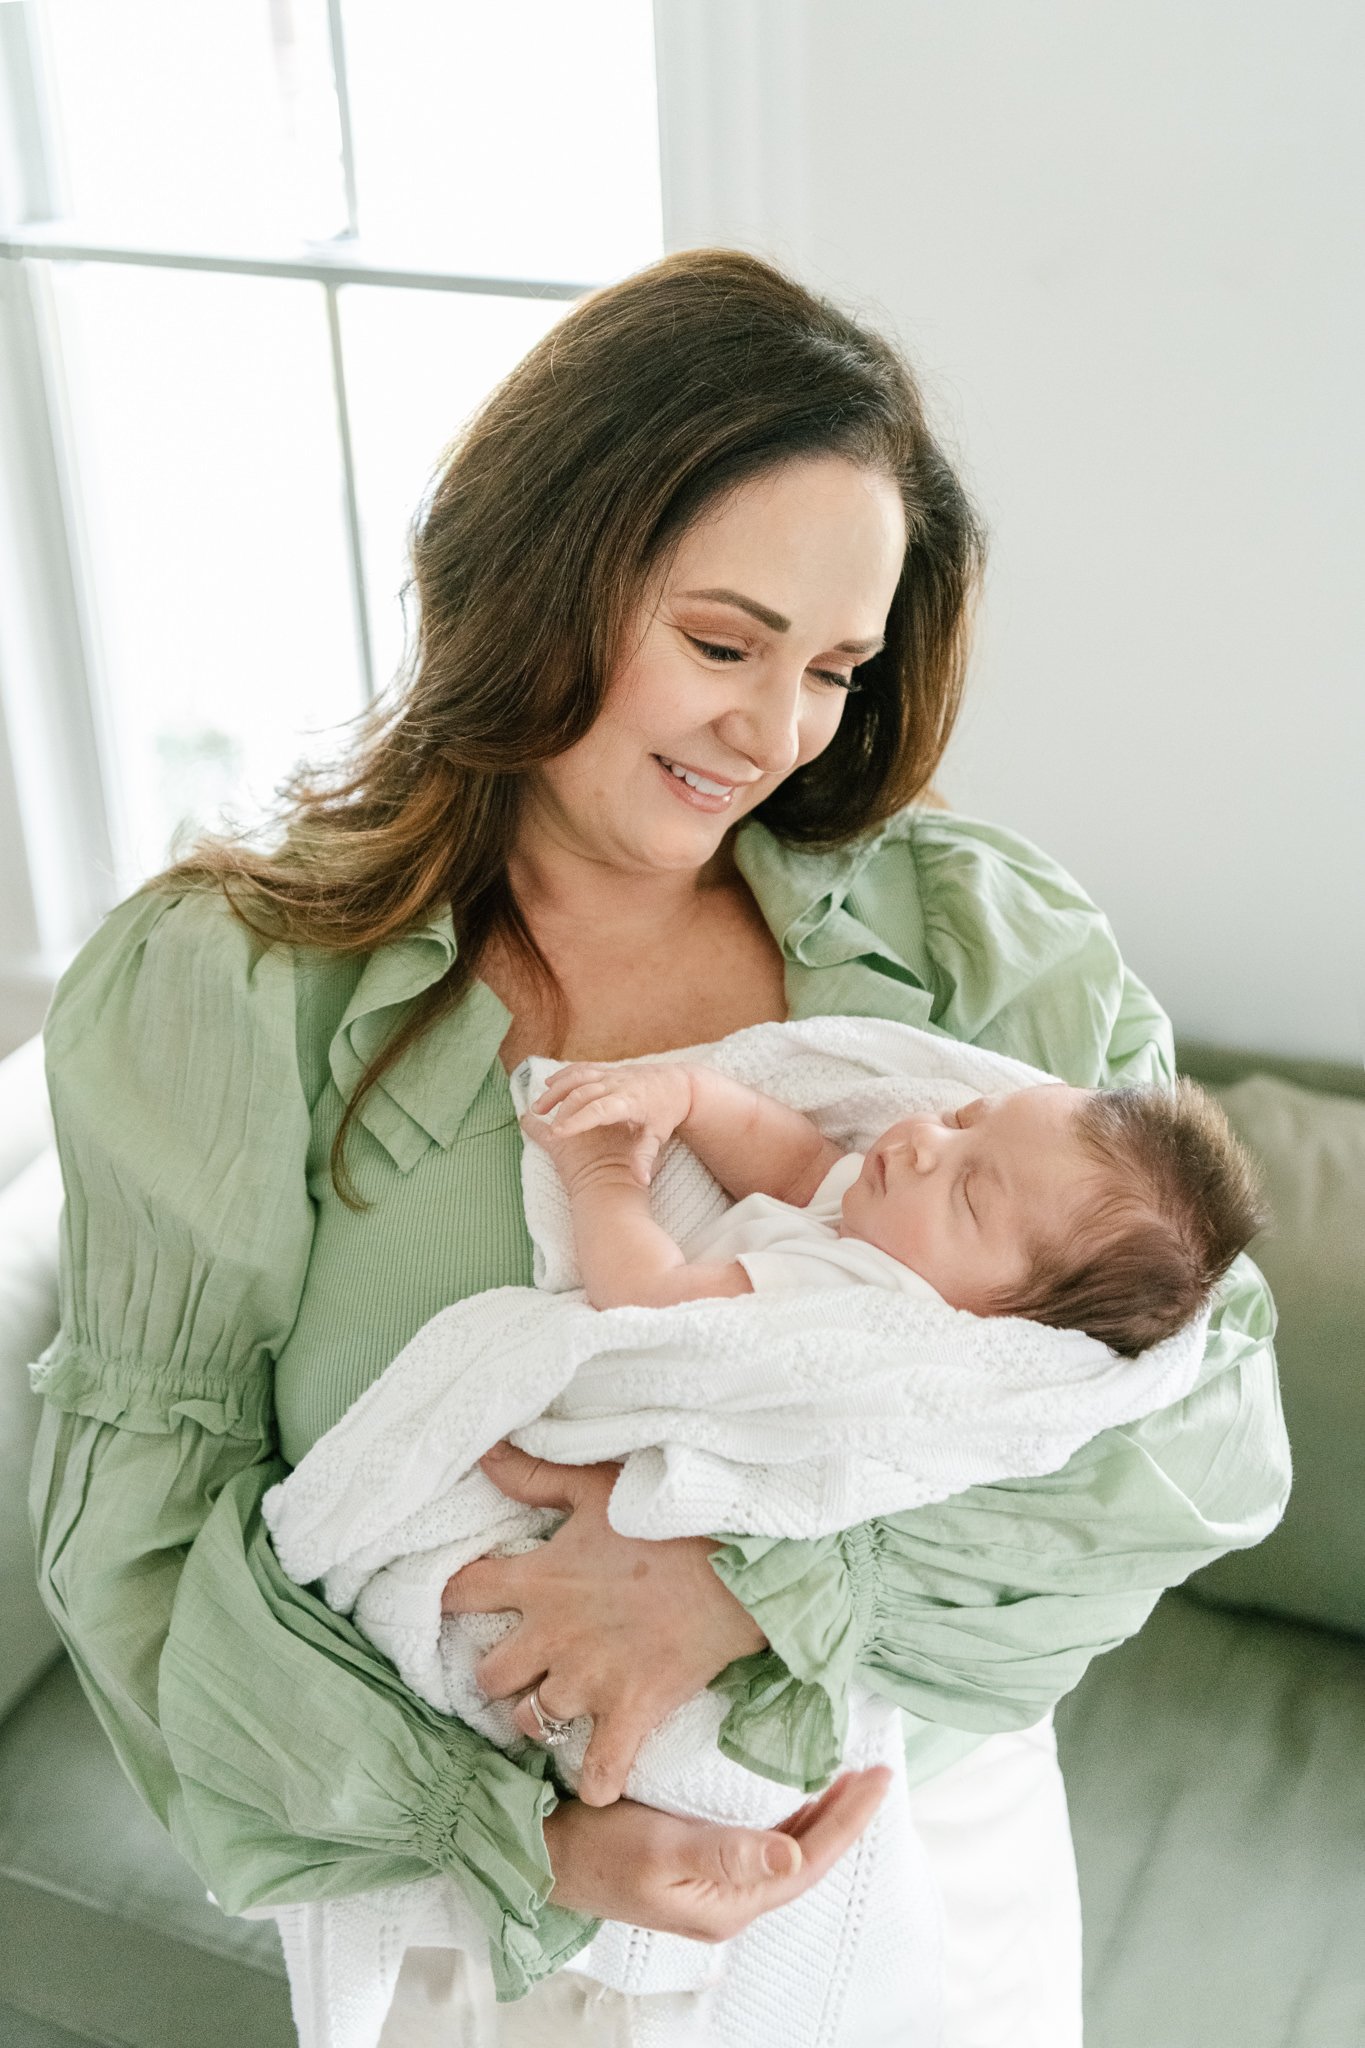  Nicole Hawkins Photography captures a grandmother with her new grandbaby during an in-home session in Montclair, NJ. grandmother portraits #NicoleHawkinsPhotography #NicoleHawkinsNewborns #MontclairNewbornPhotographer #InHomeNewborns #NJNewborns #Ba